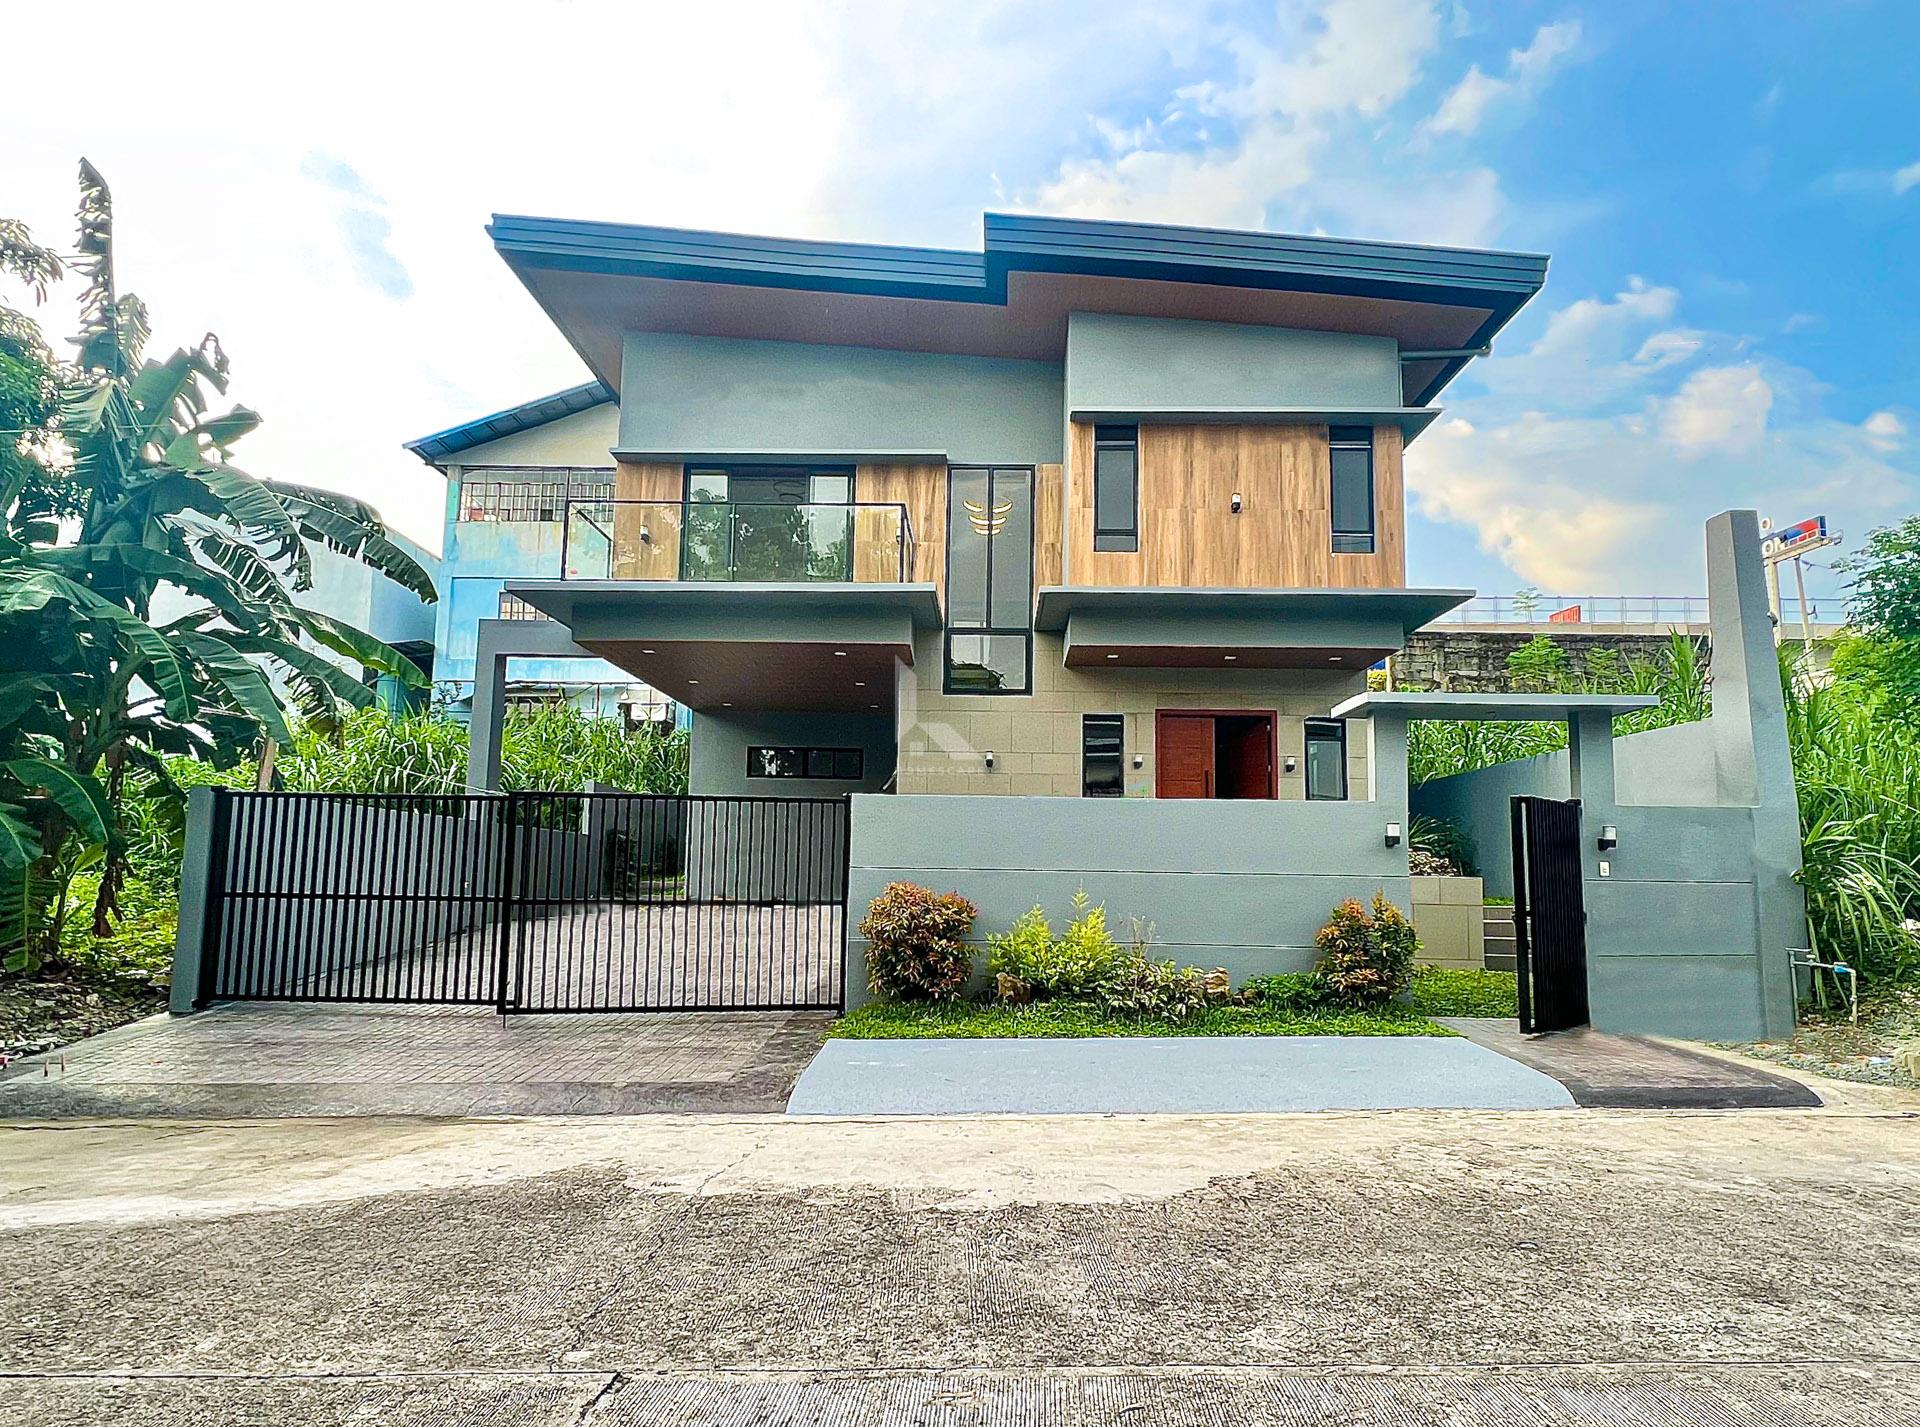 Astonishing Brand New Modern Contemporary 2-Storey House and Lot for Sale in Neopolitan Subdivision, Quezon City